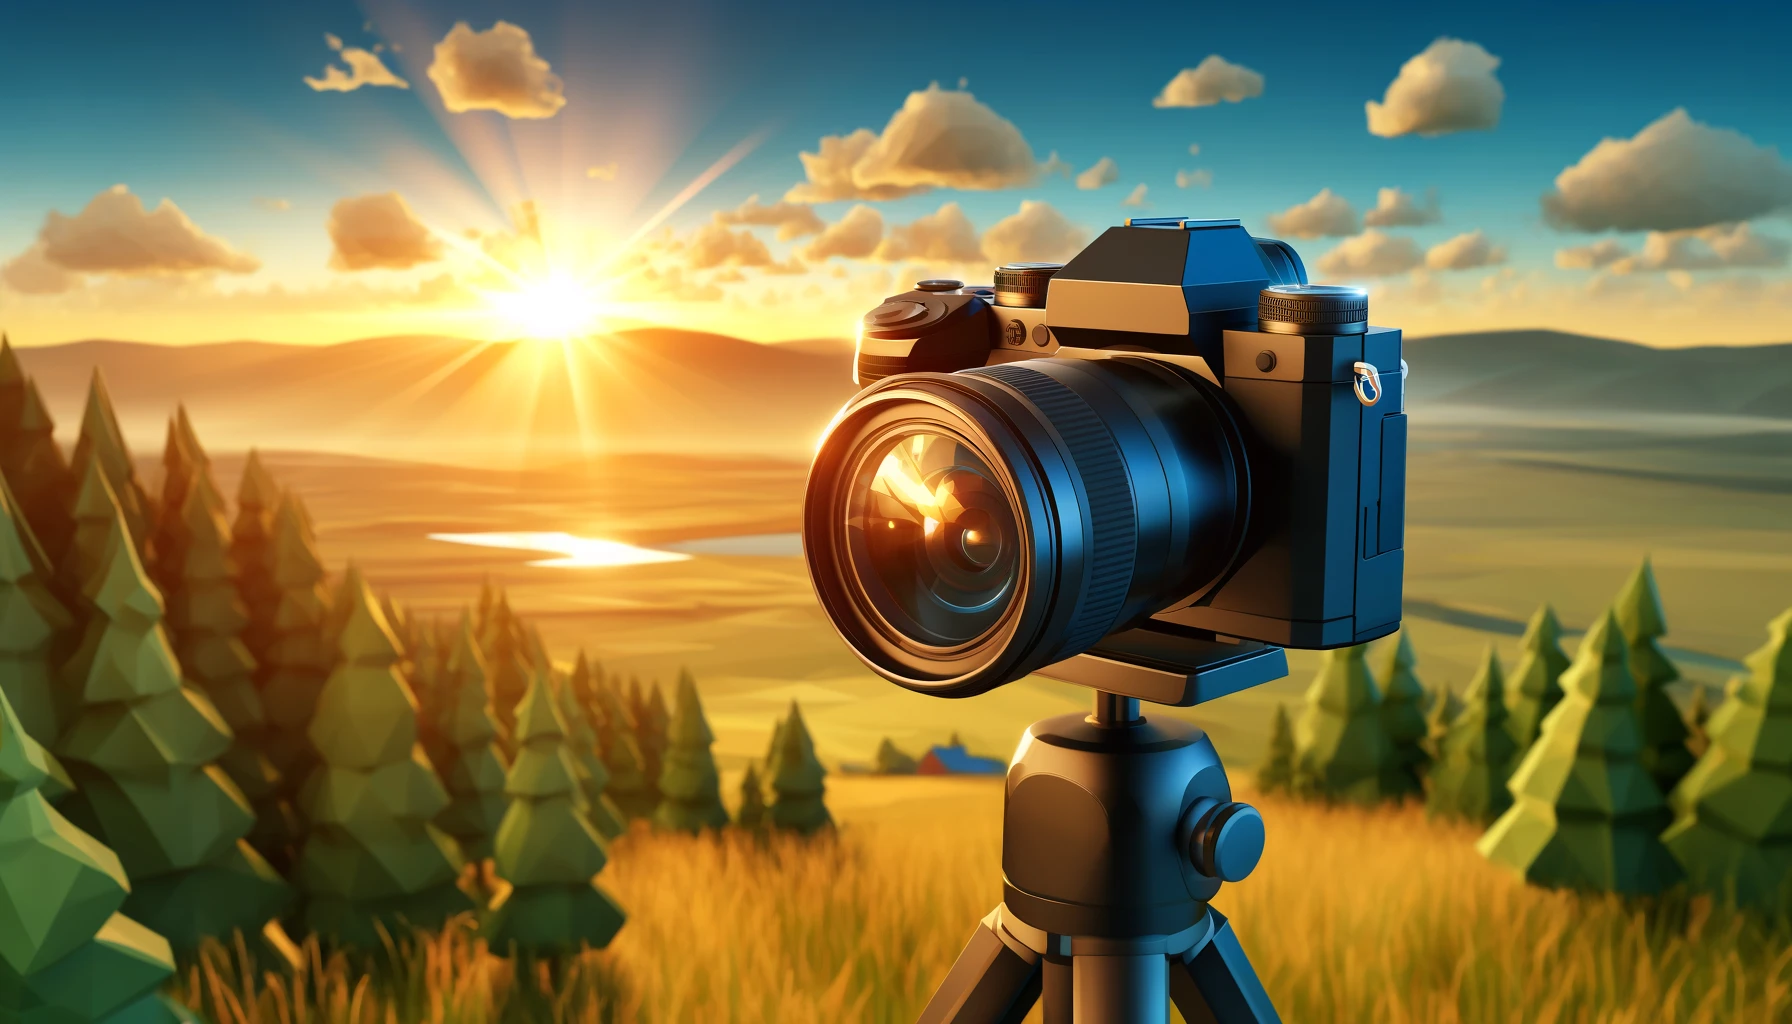 Low poly art of a digital camera on a tripod outdoors during golden hour with a mountainous landscape in the background.